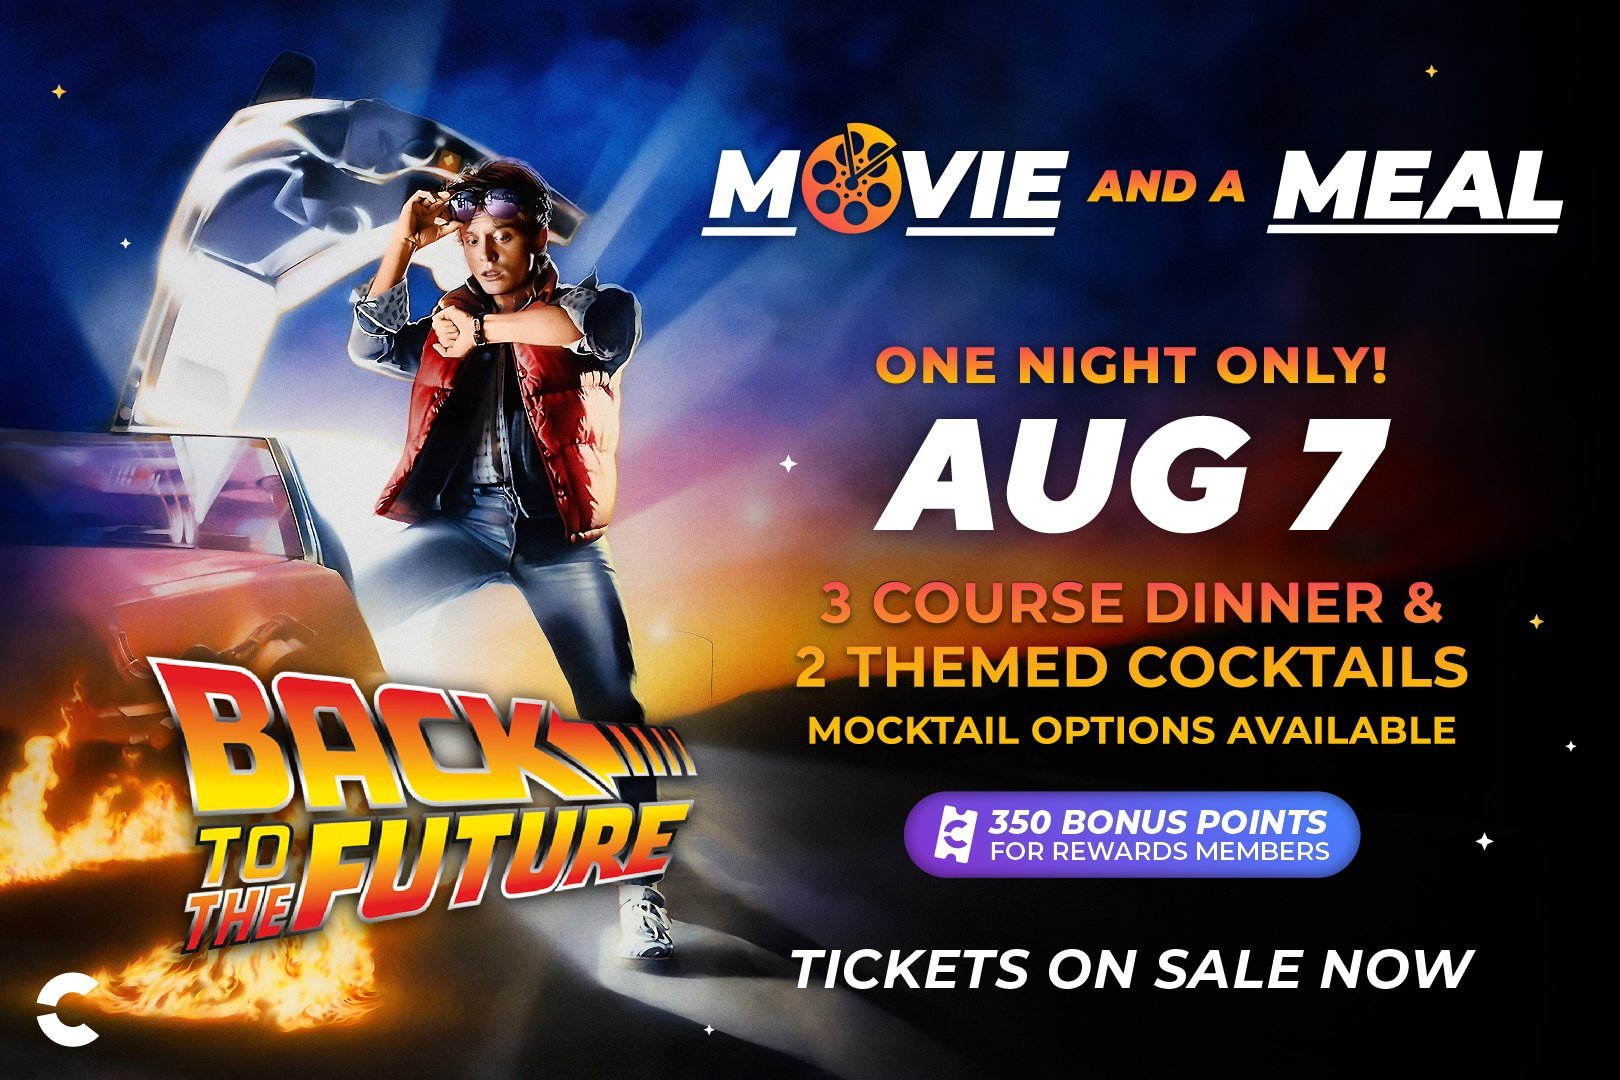 Watch Back to the Future in Theaters at Cinepolis and Moviehouse